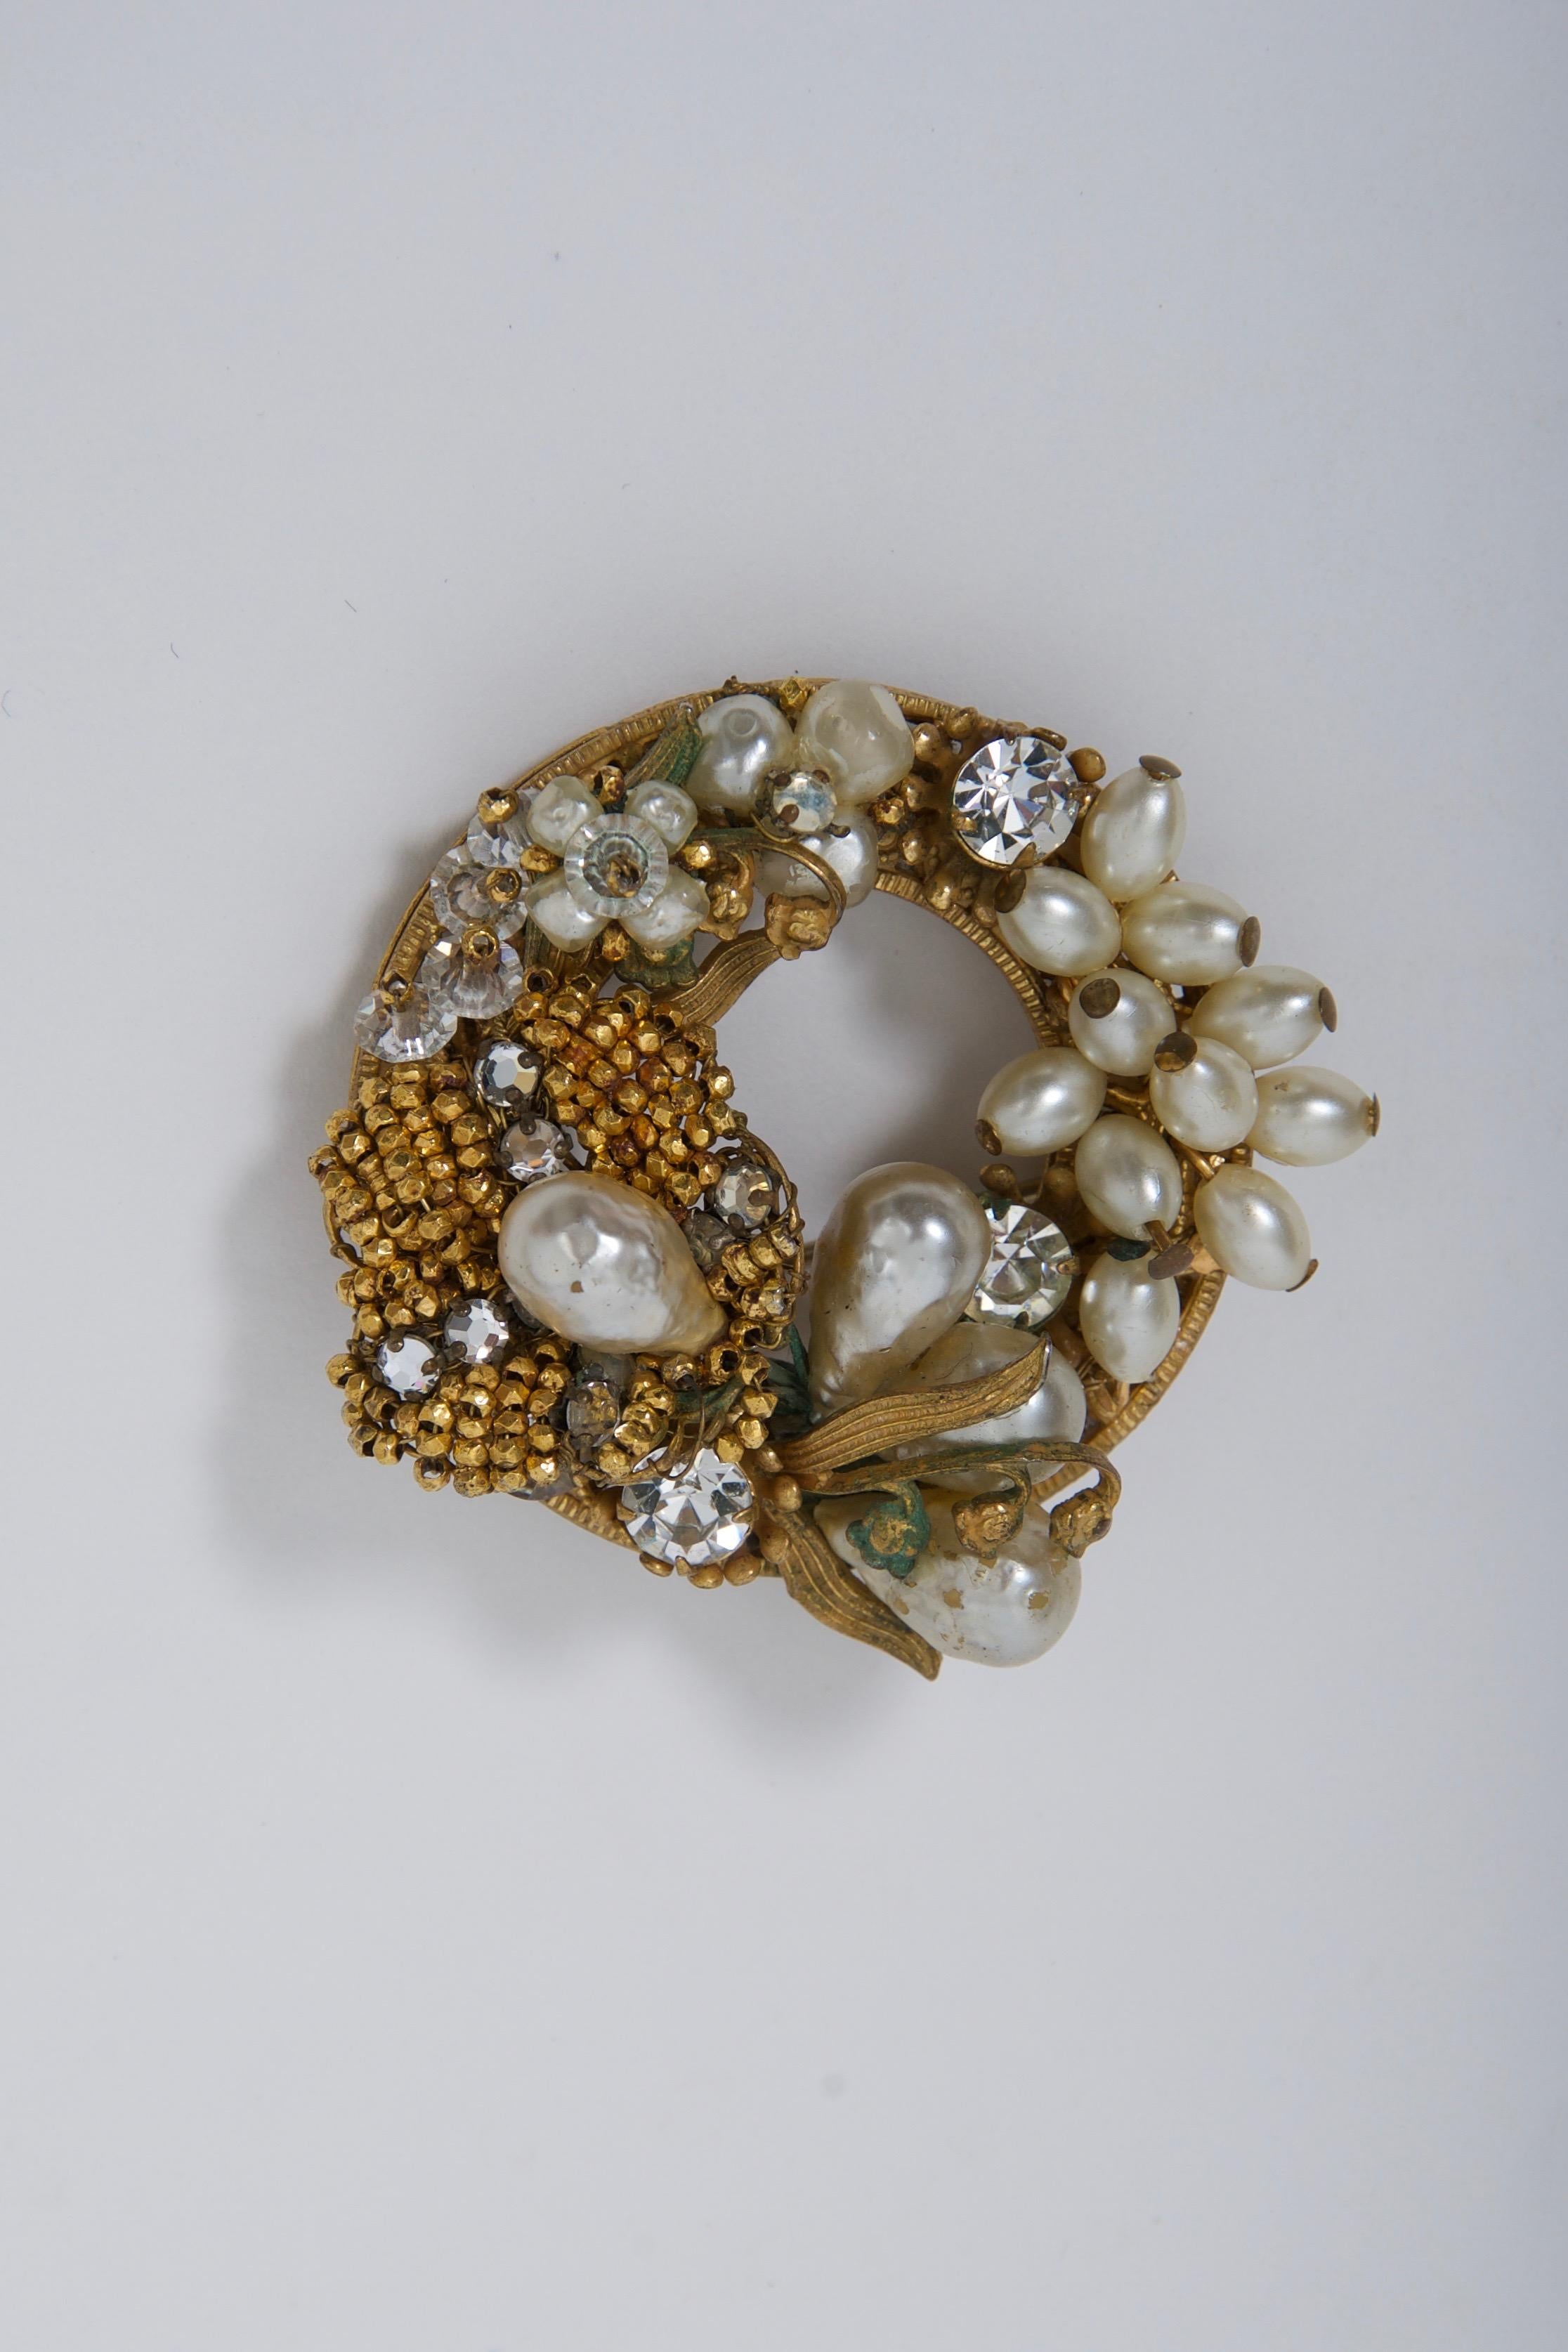 Wreath-shaped brooch of various pearls, rhinestones, crystals, and micro gold beads by Robert, c.1960. Hook in addition to pin, so can be worn as pendant. Some of the Original by Robert pieces were similar to that of Miriam Haskell and De Mario, as